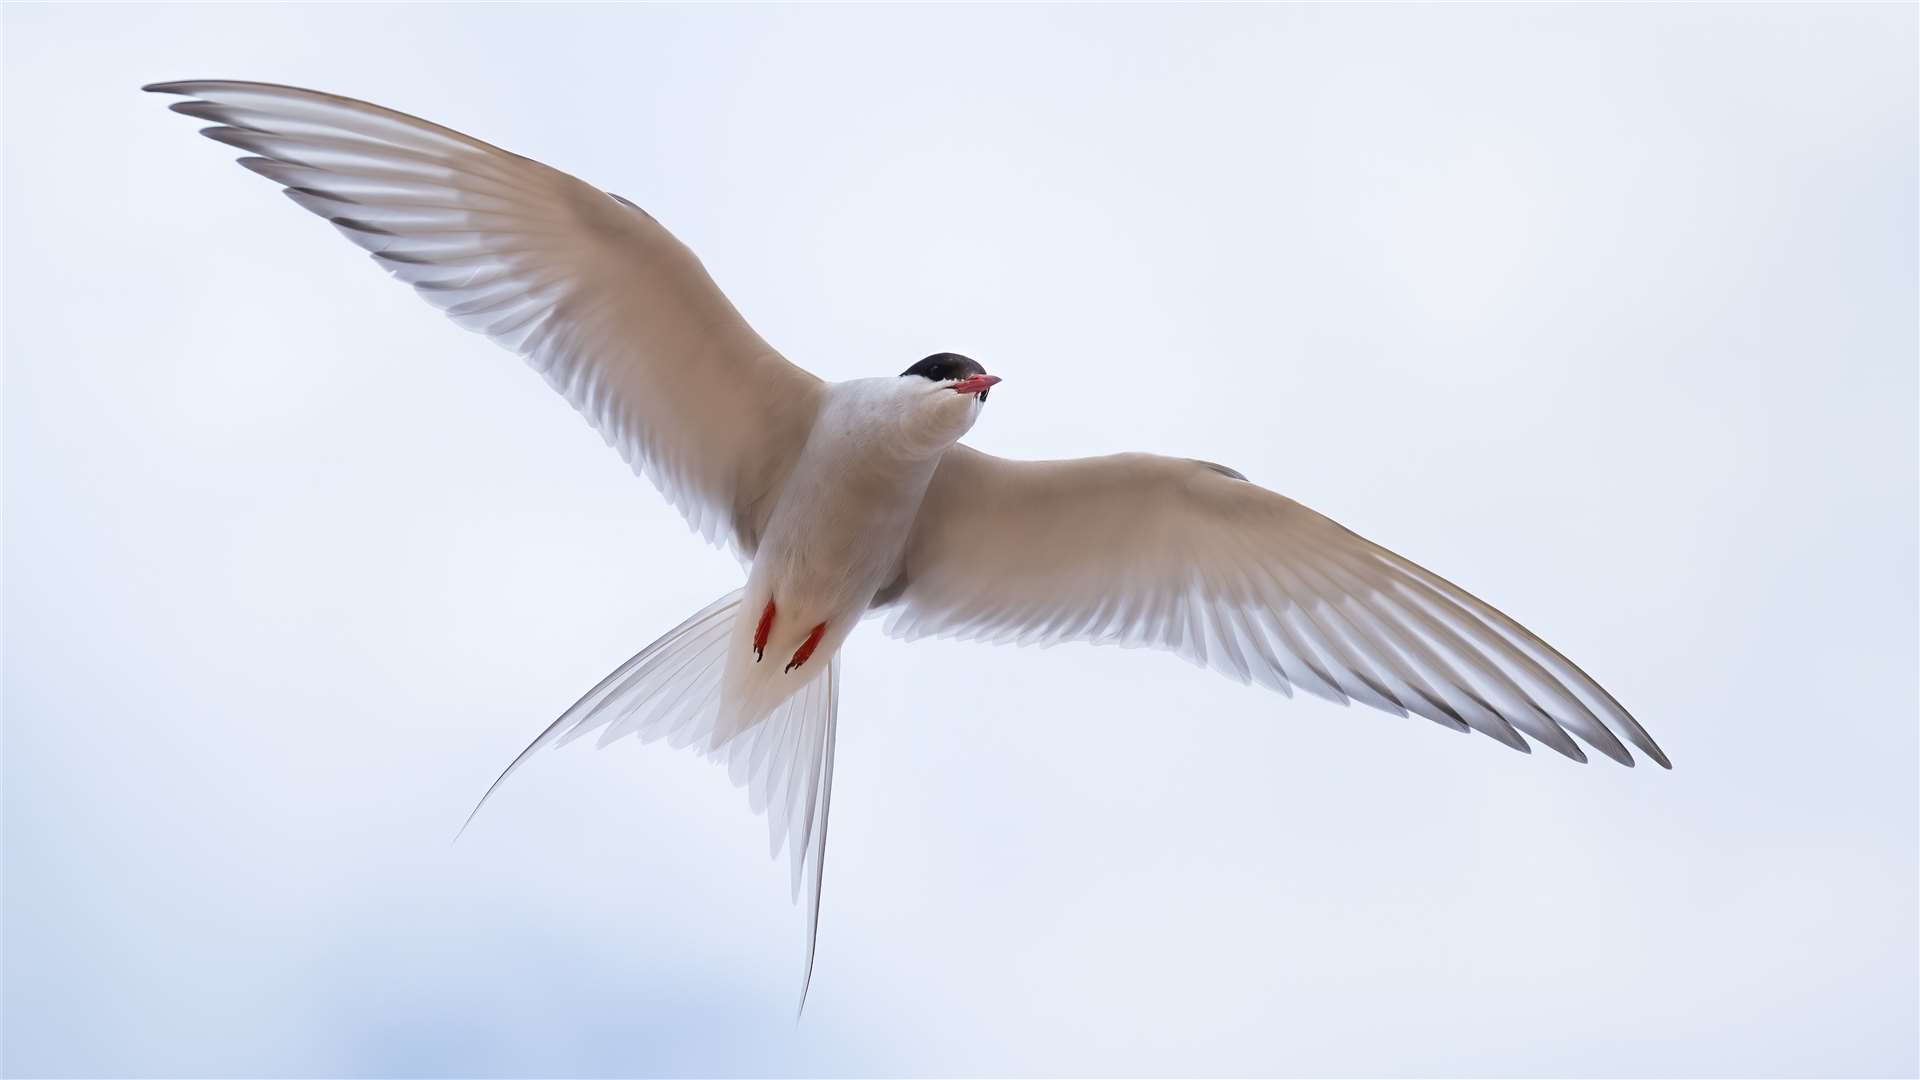 An Arctic tern flying close showing his wings and plumage.